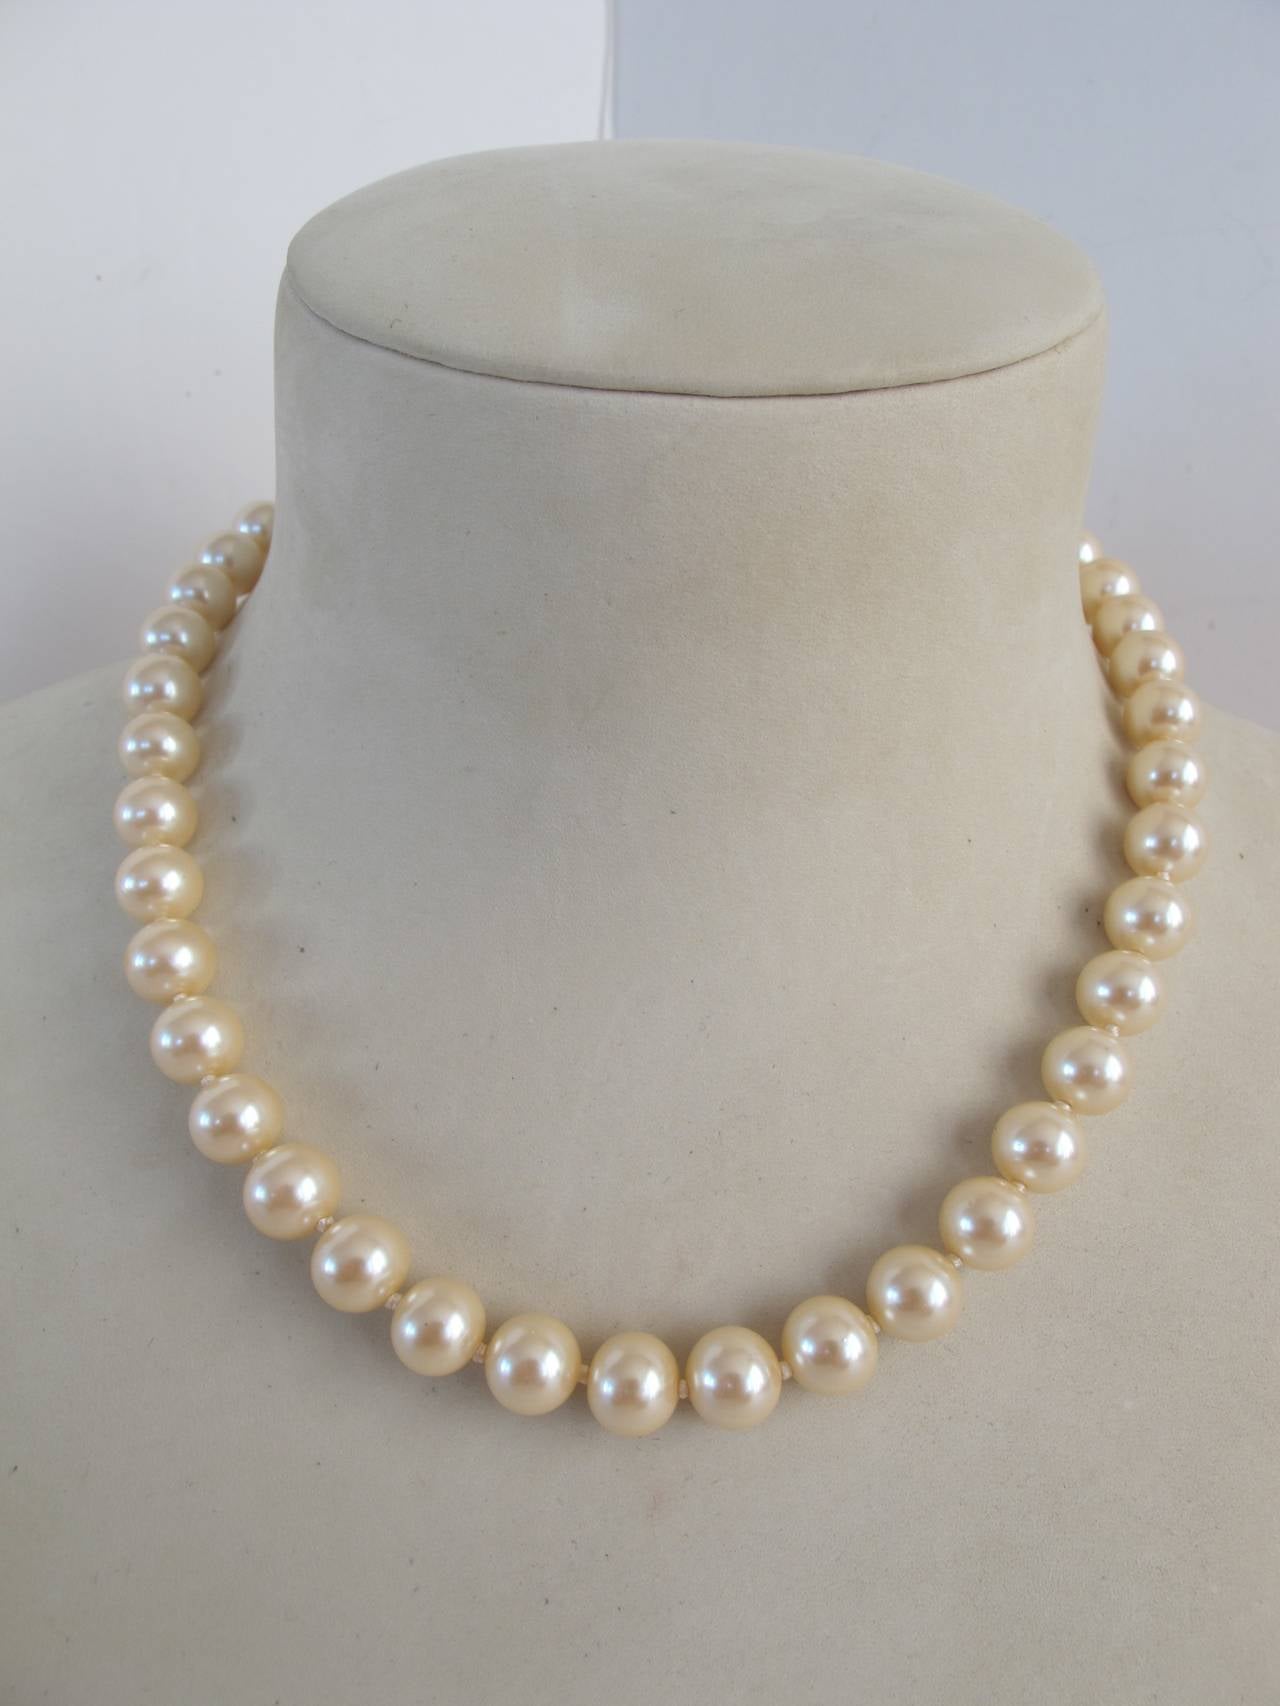 Knotted 1960's 1.5 cm Pearl Necklace with Rhinestone Disco Ball Closure In Excellent Condition For Sale In San Francisco, CA